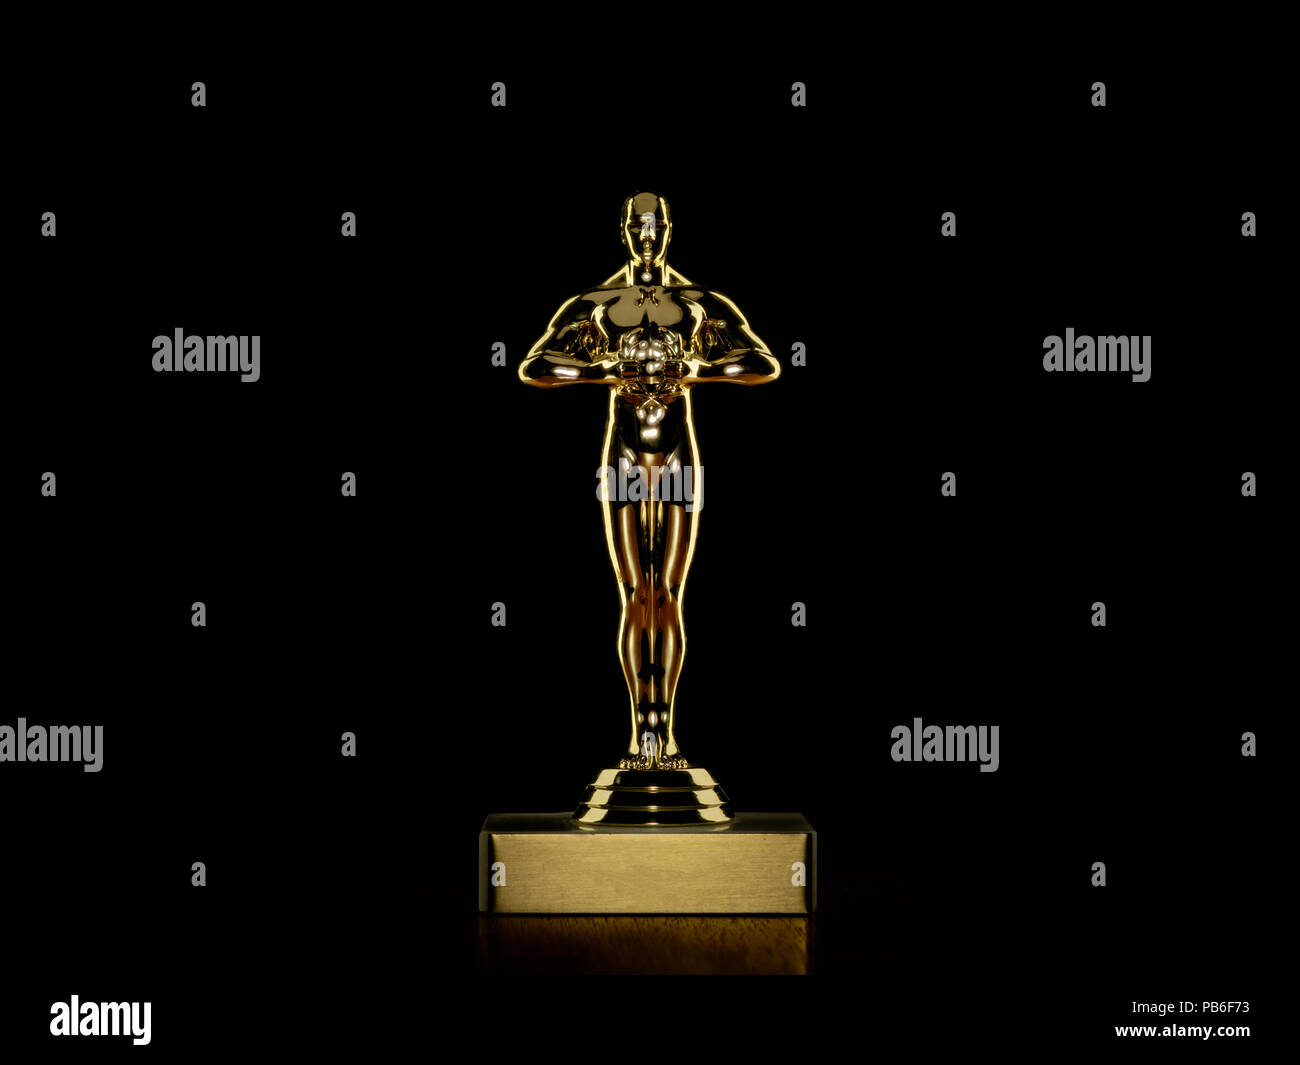 Golden award statue for entertainment industry on black with reflection Stock Photo